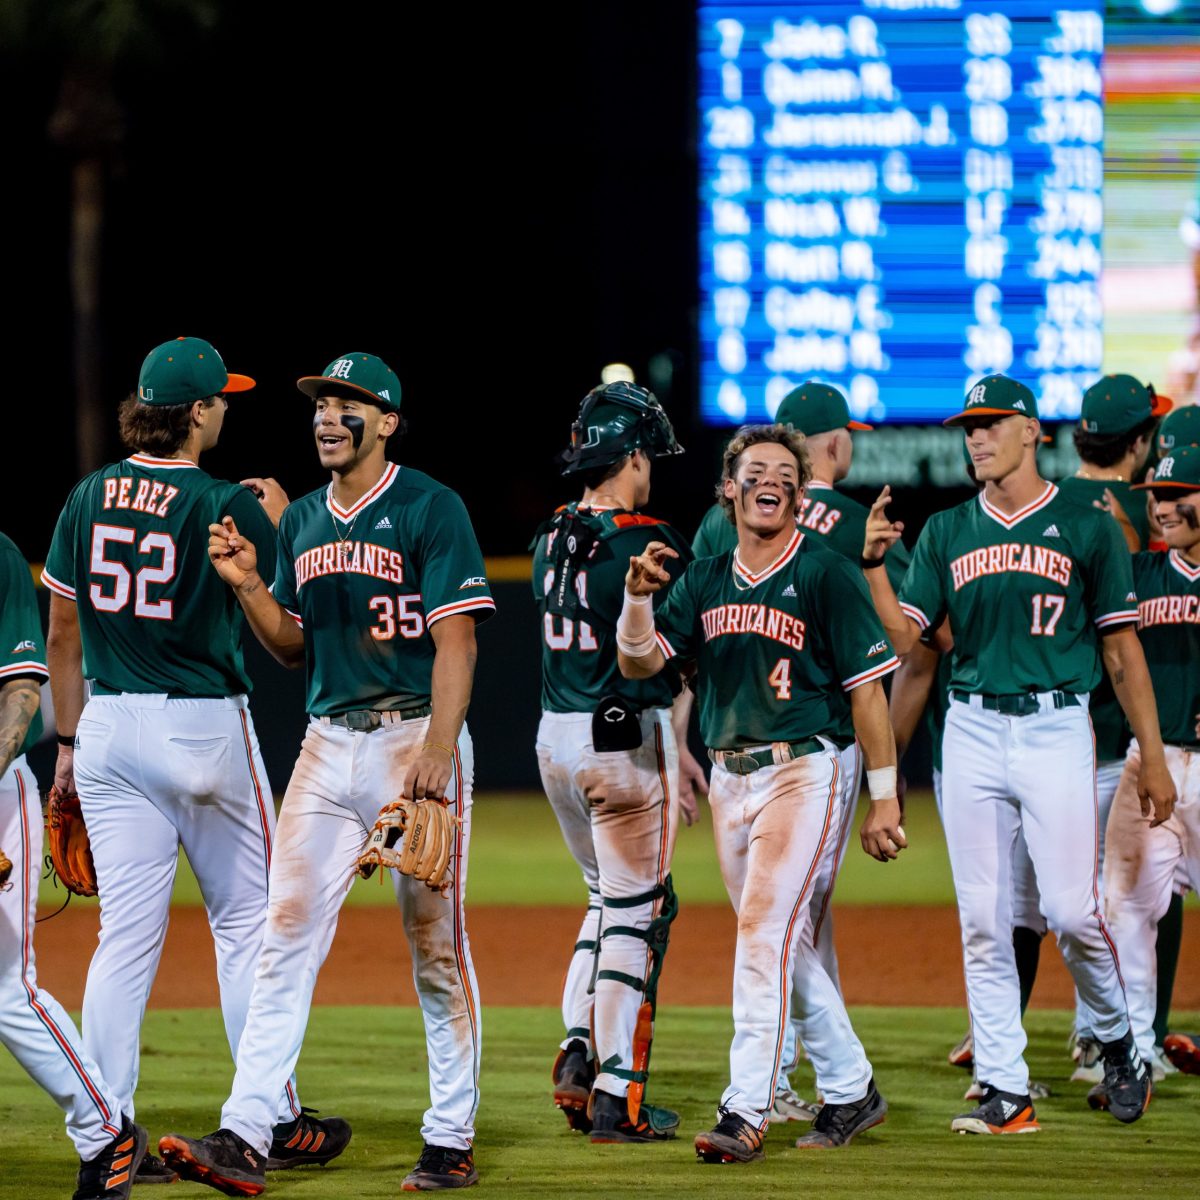 Early home runs help Miami defeat Maine in Coral Gables regional